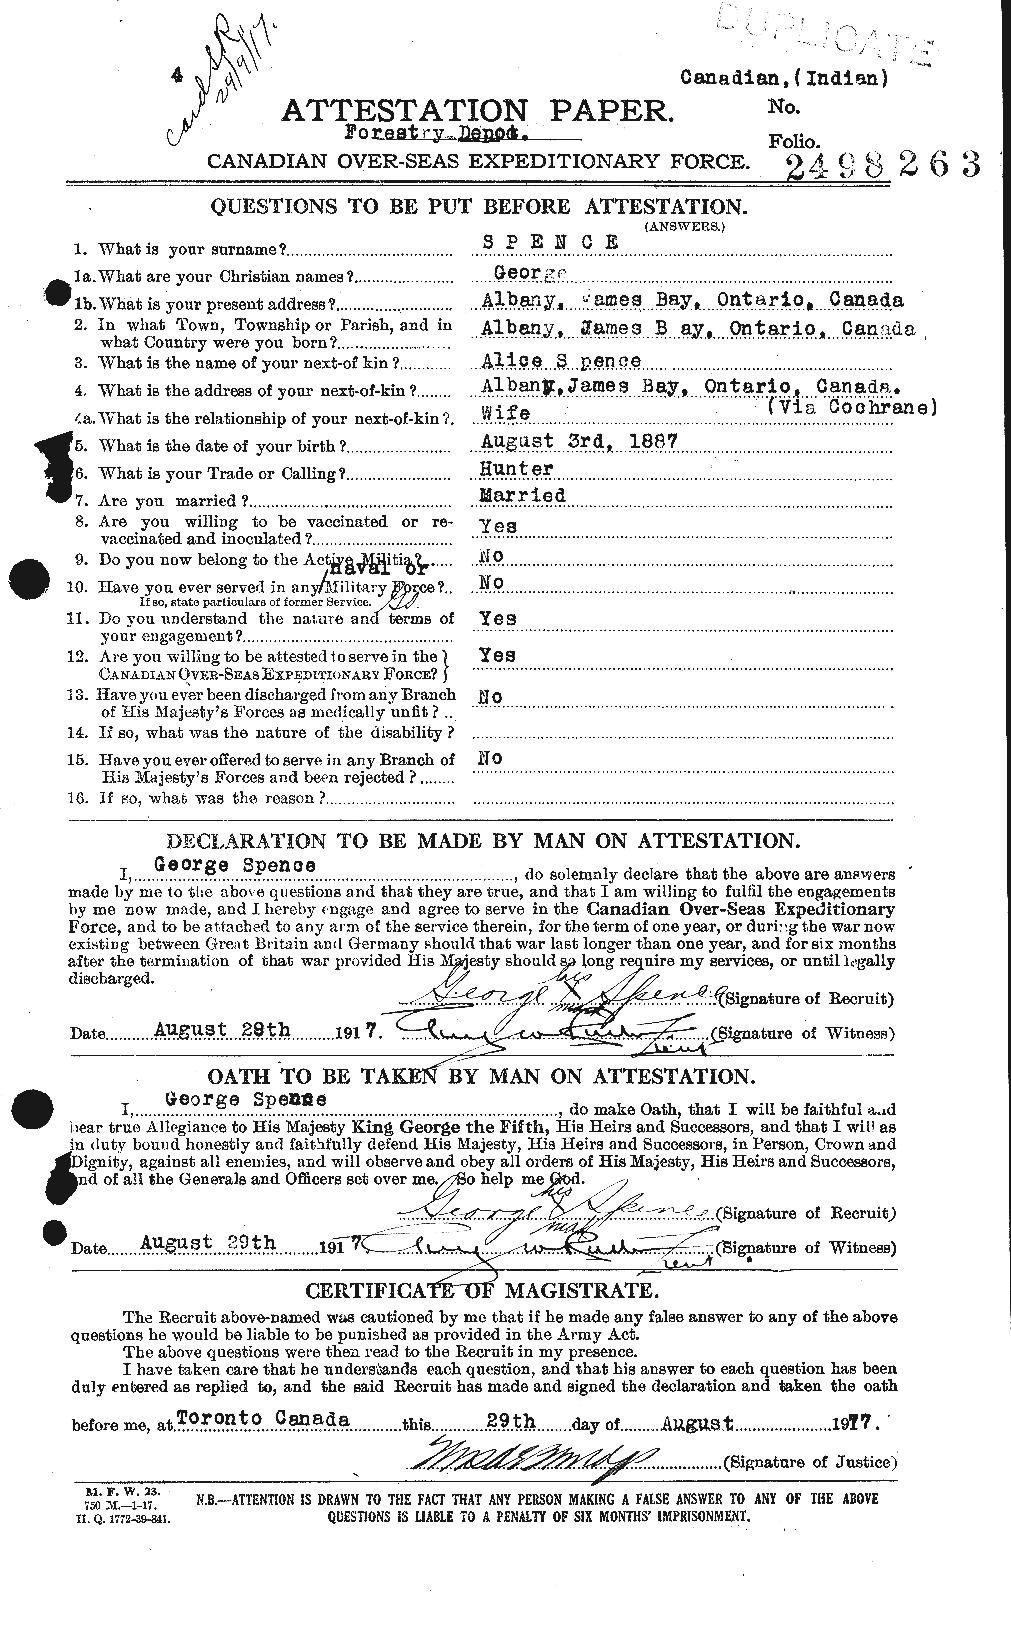 Personnel Records of the First World War - CEF 109523a